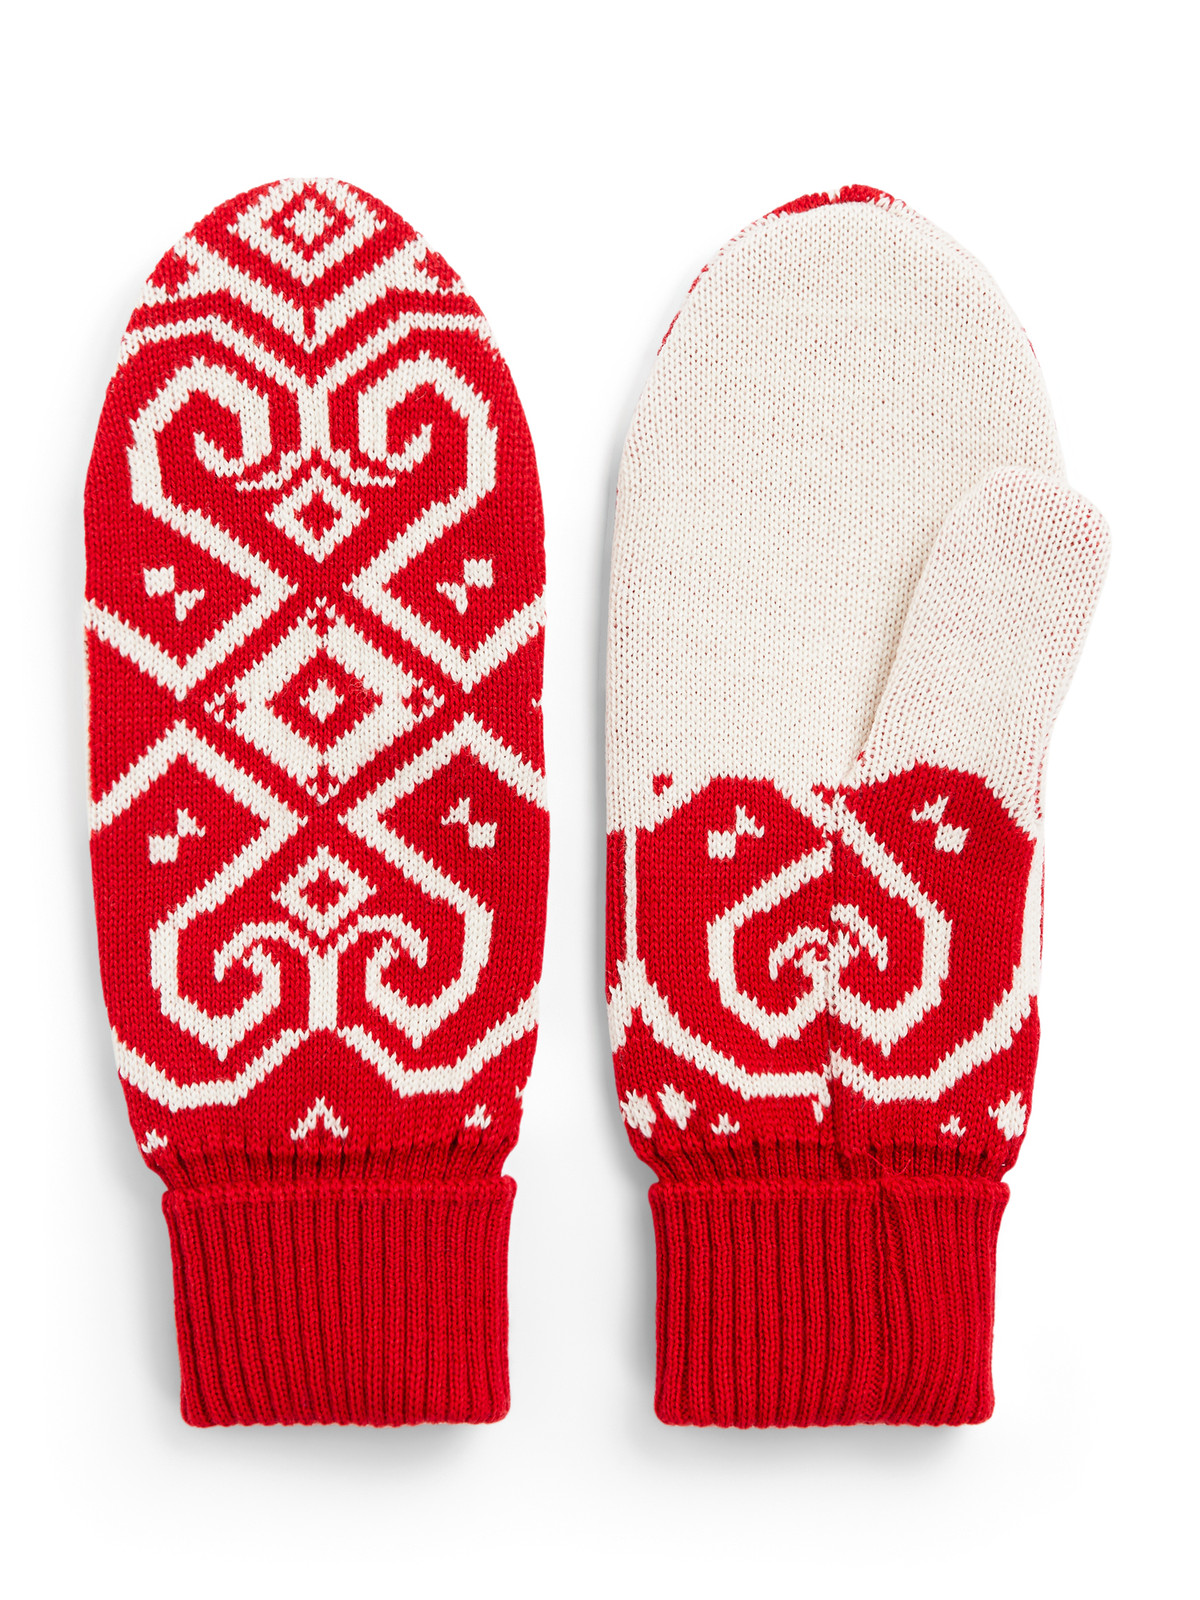 Dale of Norway Falun Mittens - Raspberry/Off White, 25051-B00_product